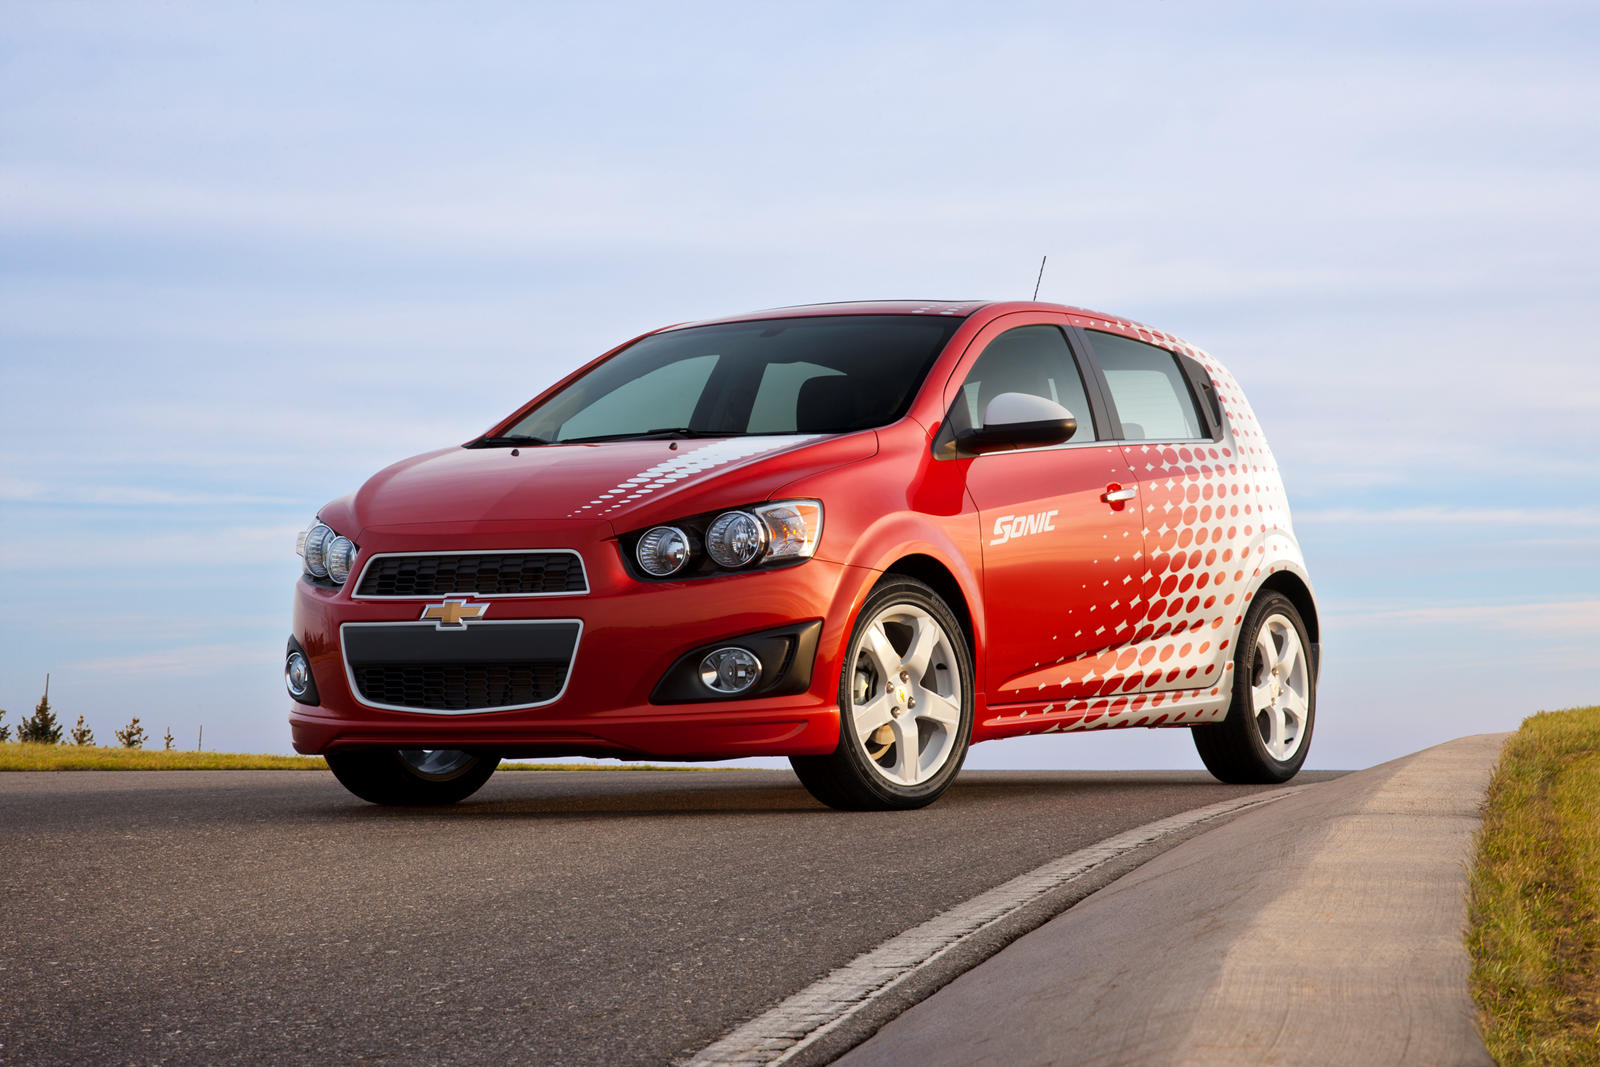 2013 Chevrolet Sonic Hatchback Front Angle View